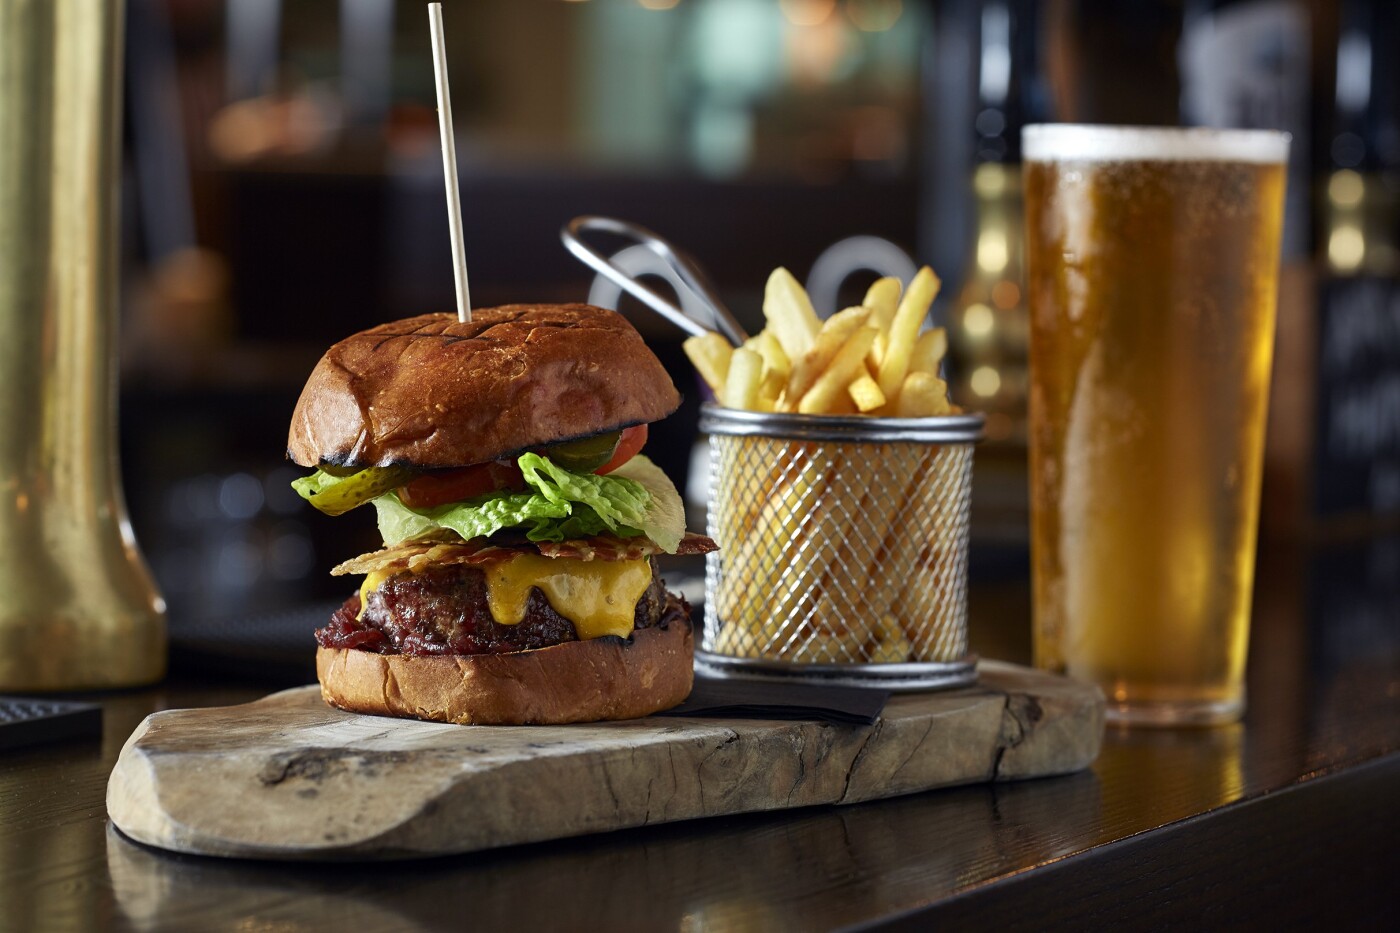 This juicy cheese and bacon burger served with crispy fries and a refreshing lager was shot for The Captain Cook Pub in Fulham, London. They taste as good as they look!